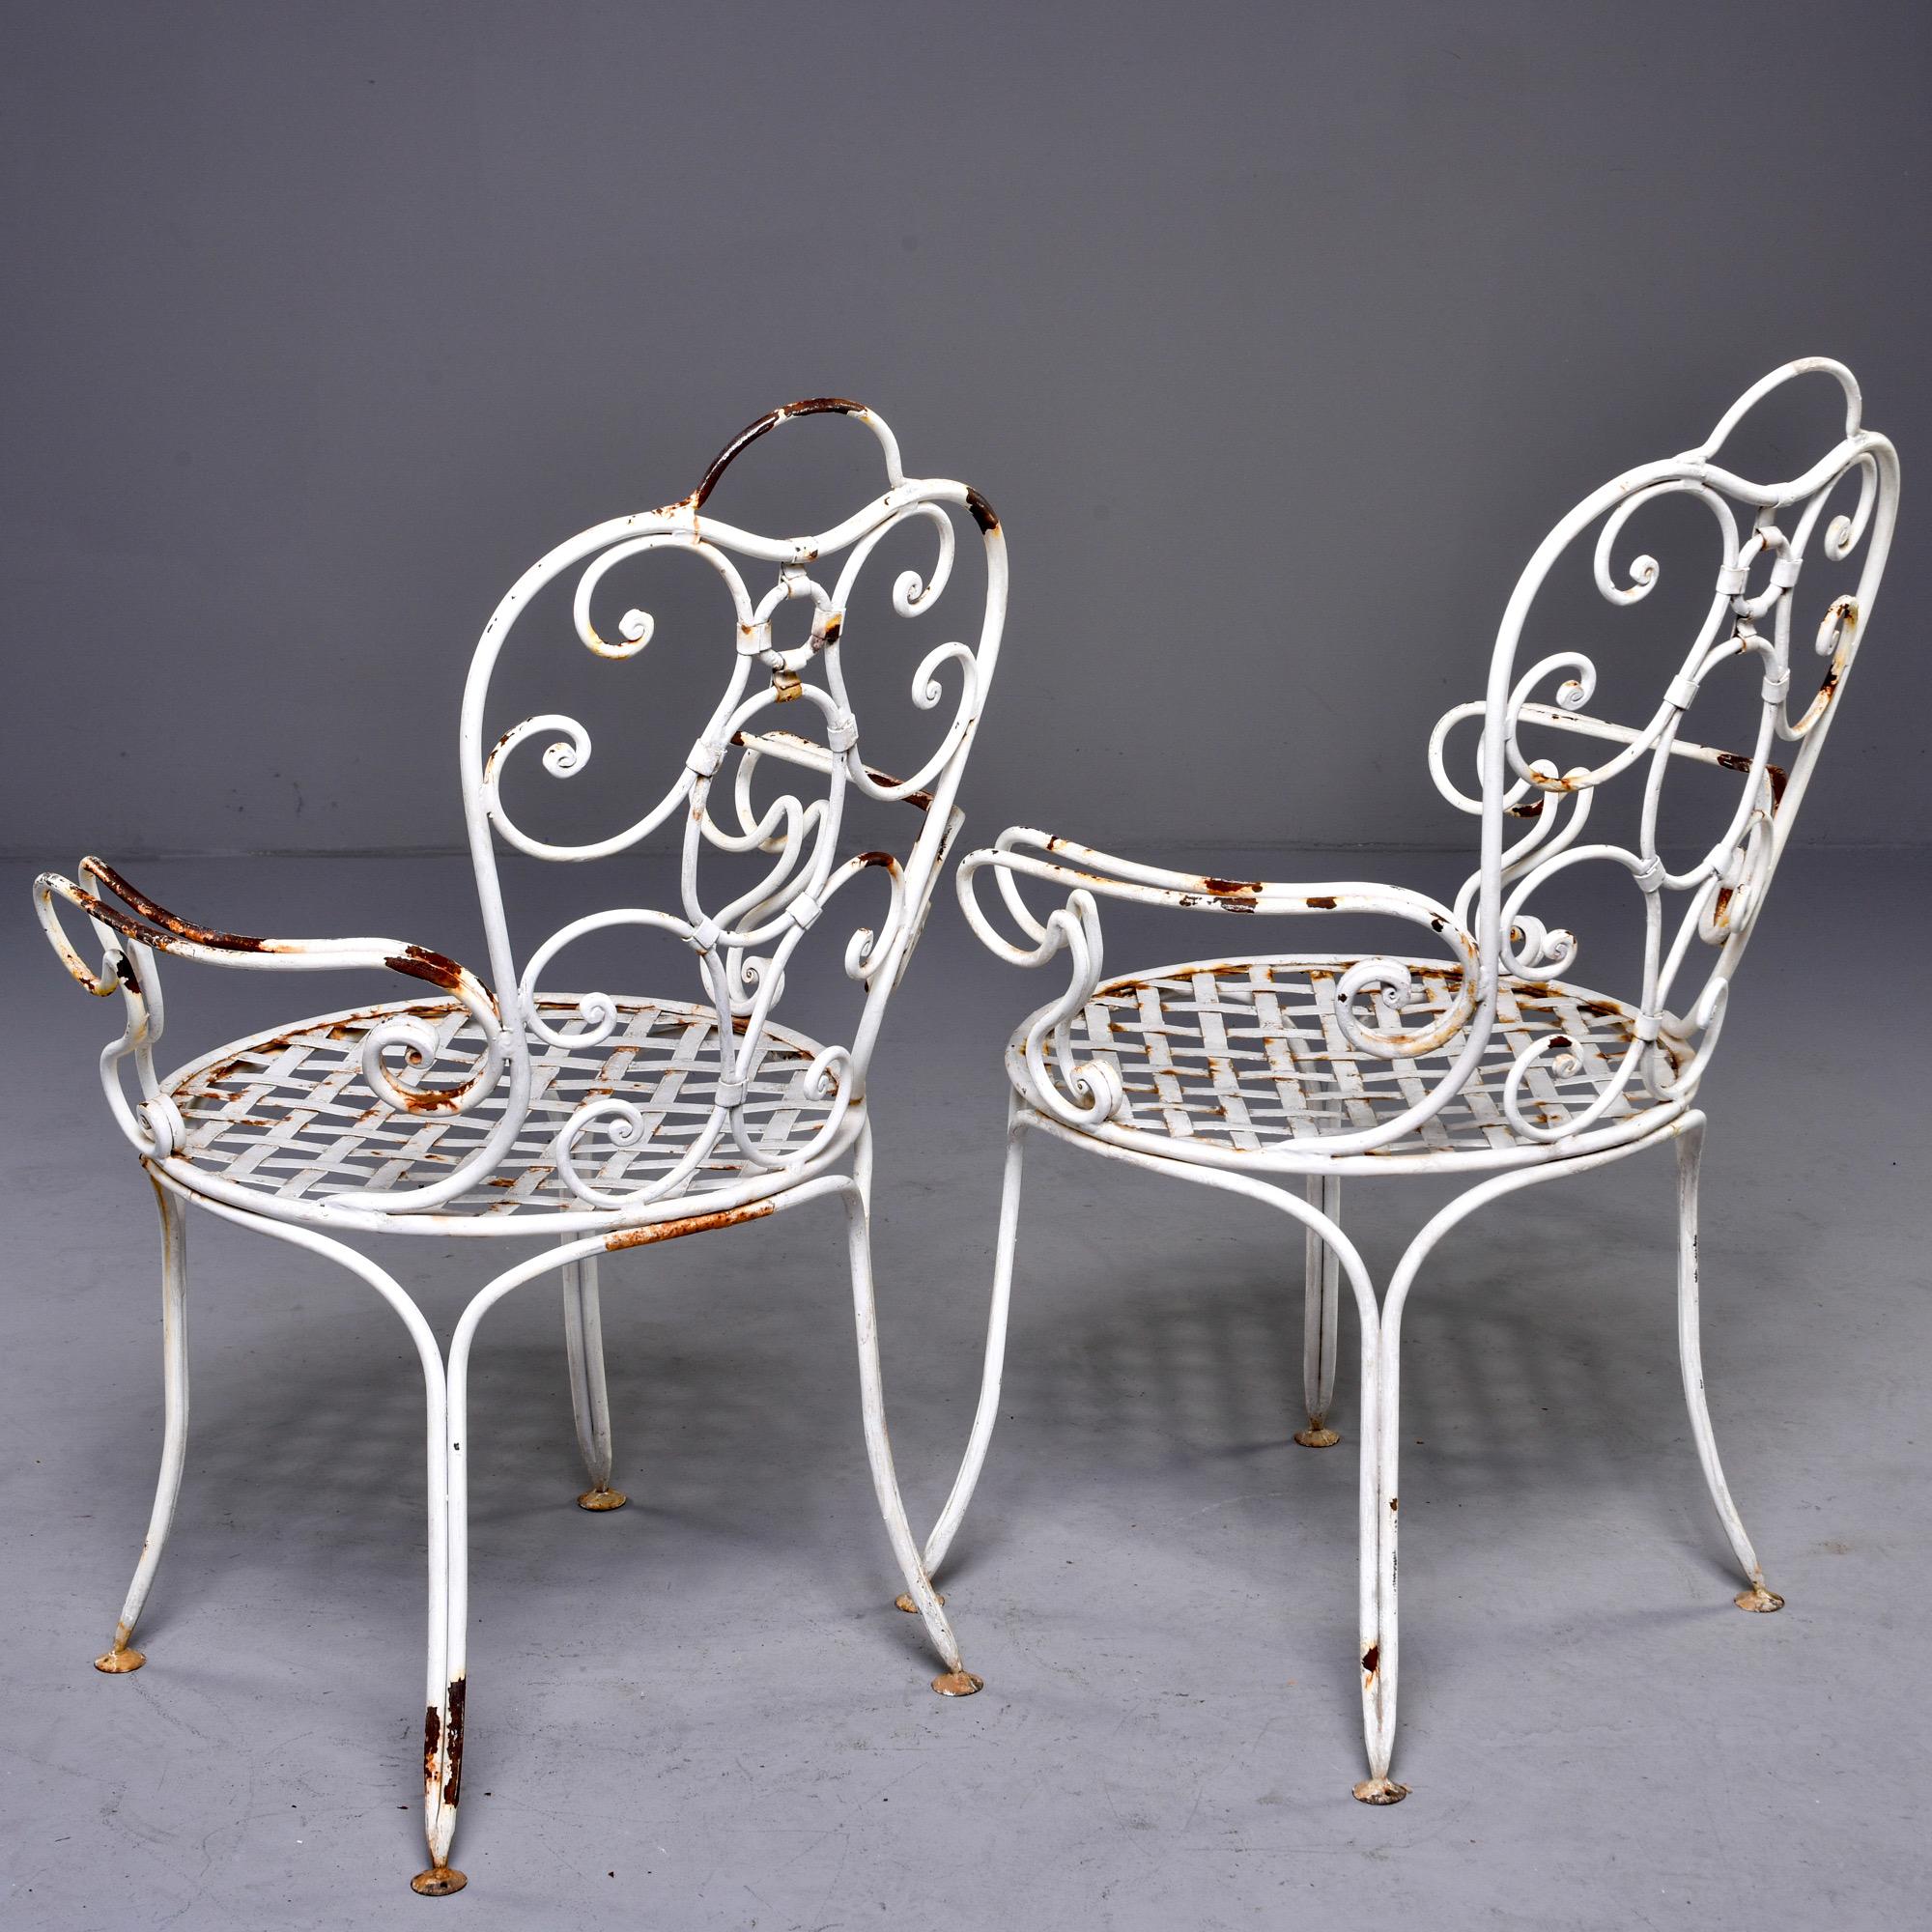 Early 20th C French White Iron Five Piece Garden Set 7